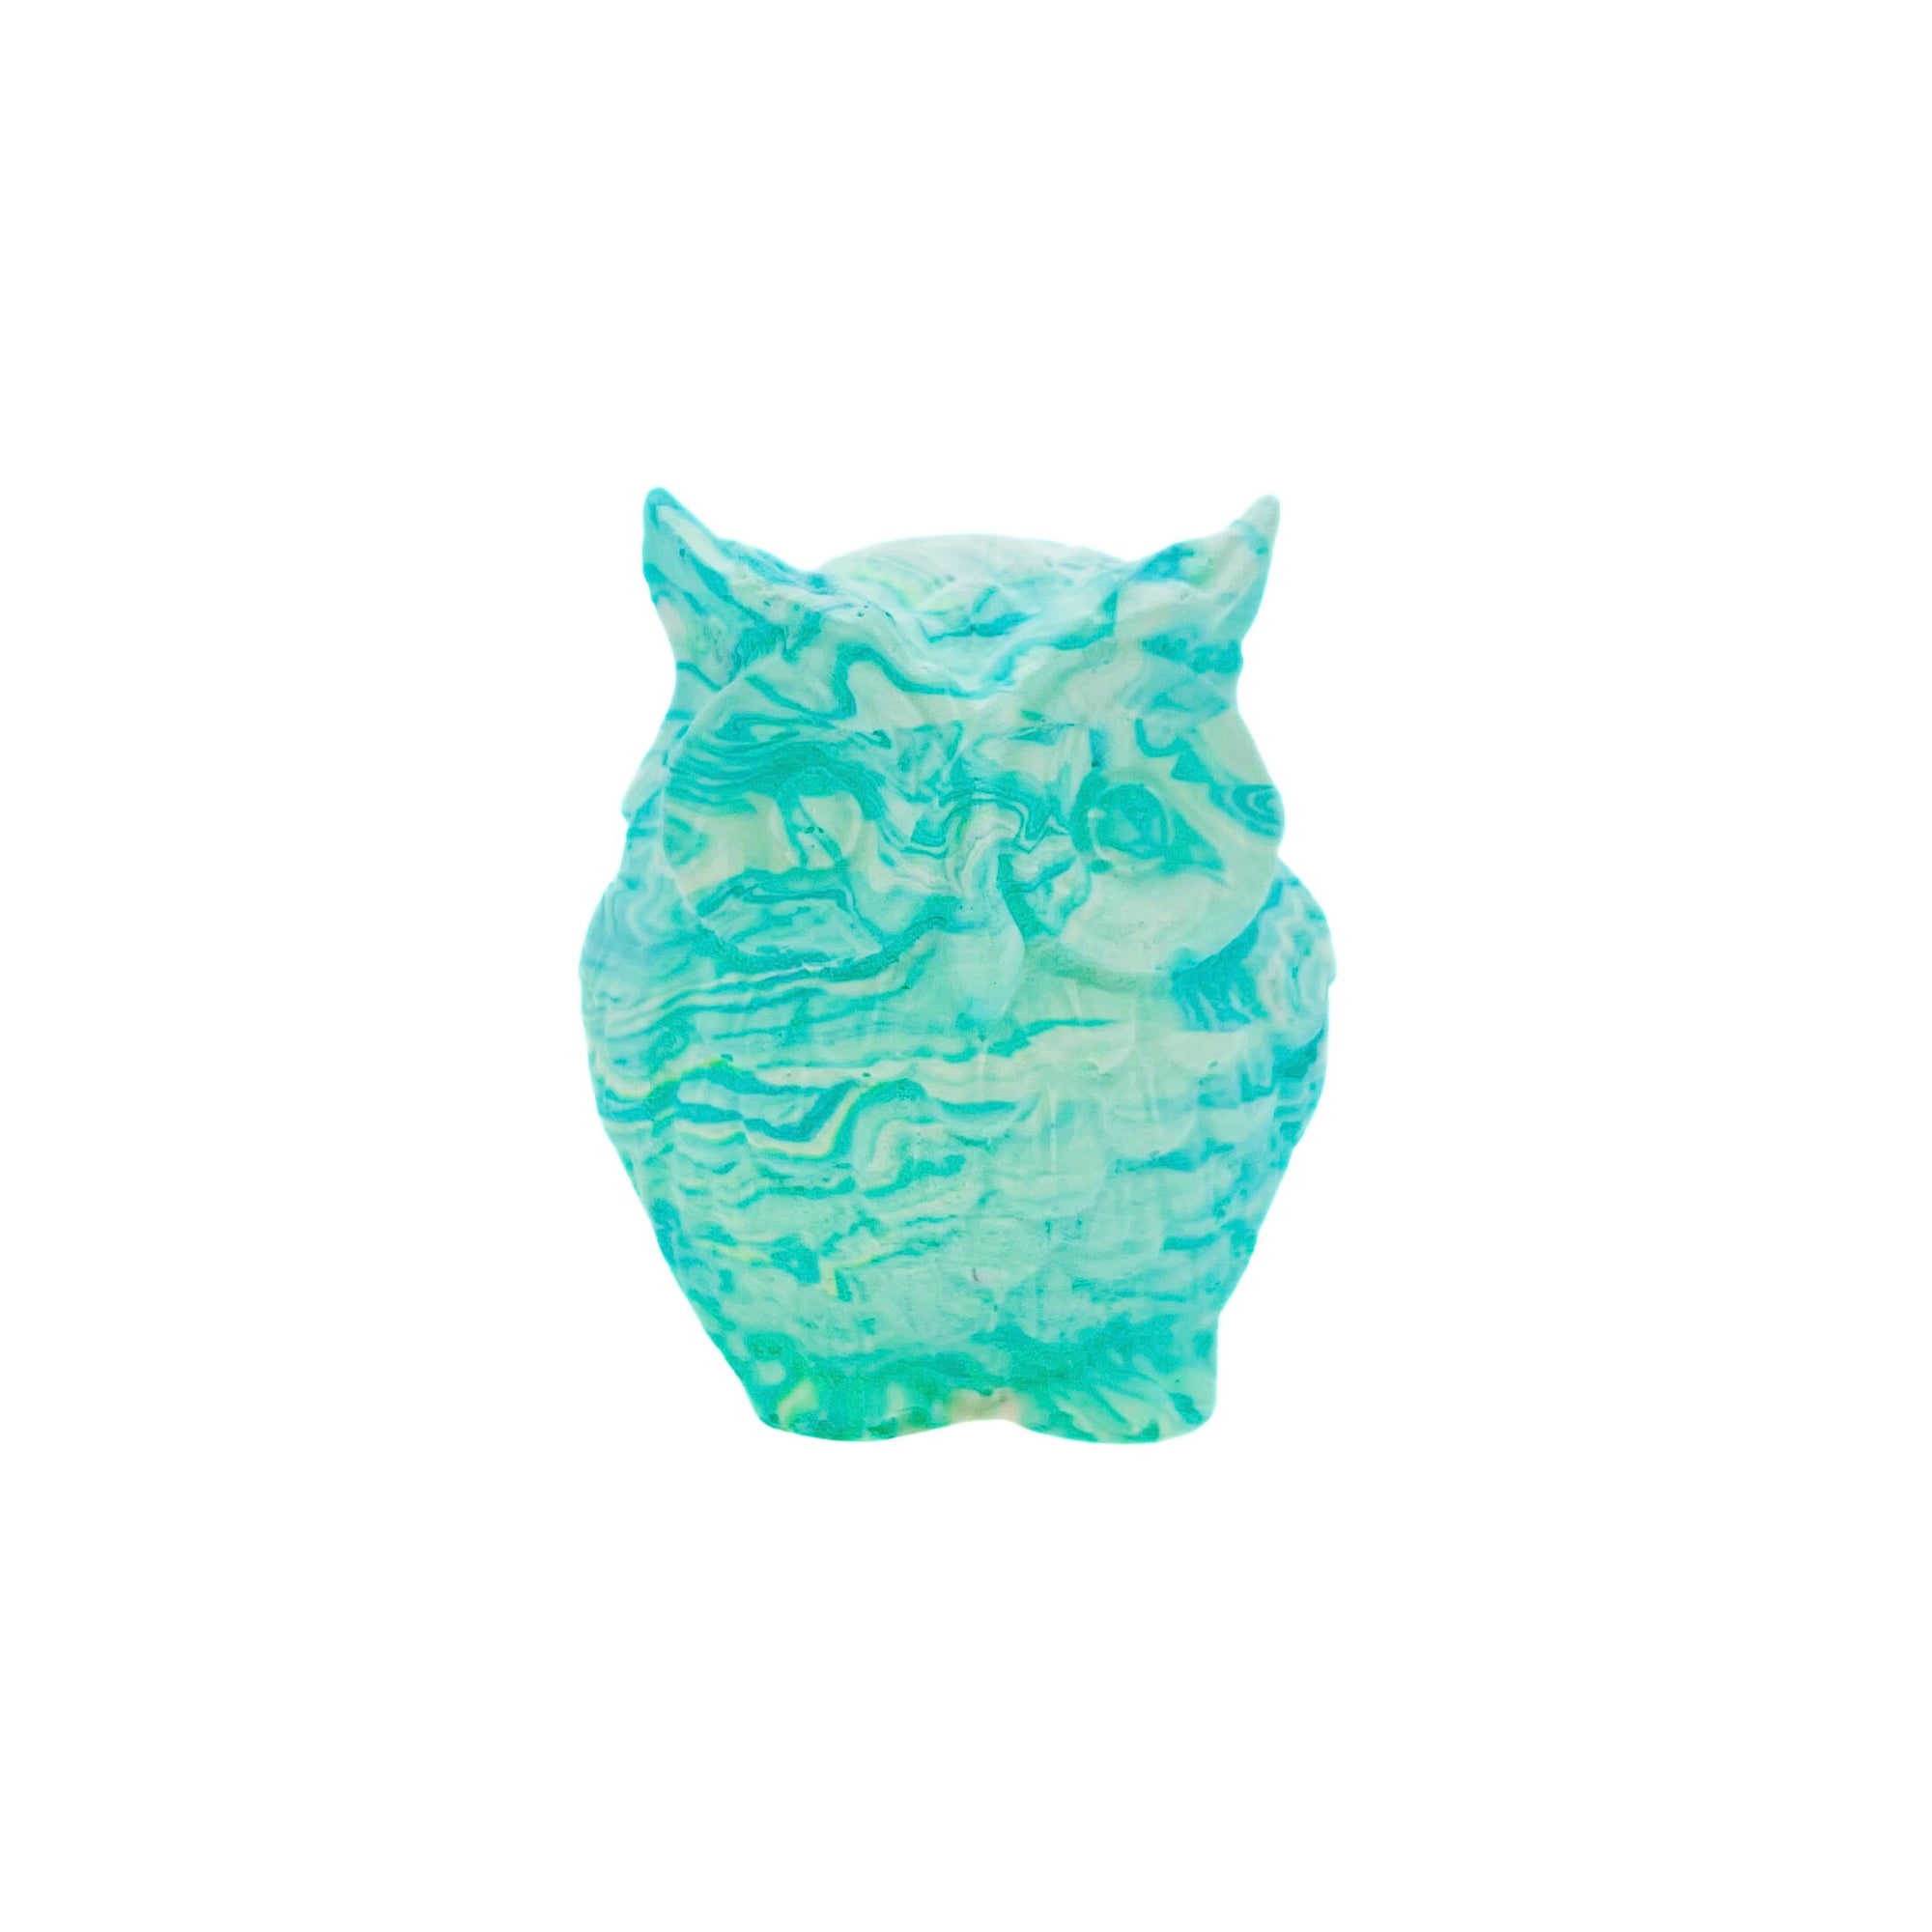 A small owl made from Jesmonite measuring 5cm in height marbled with turquoise pigment.